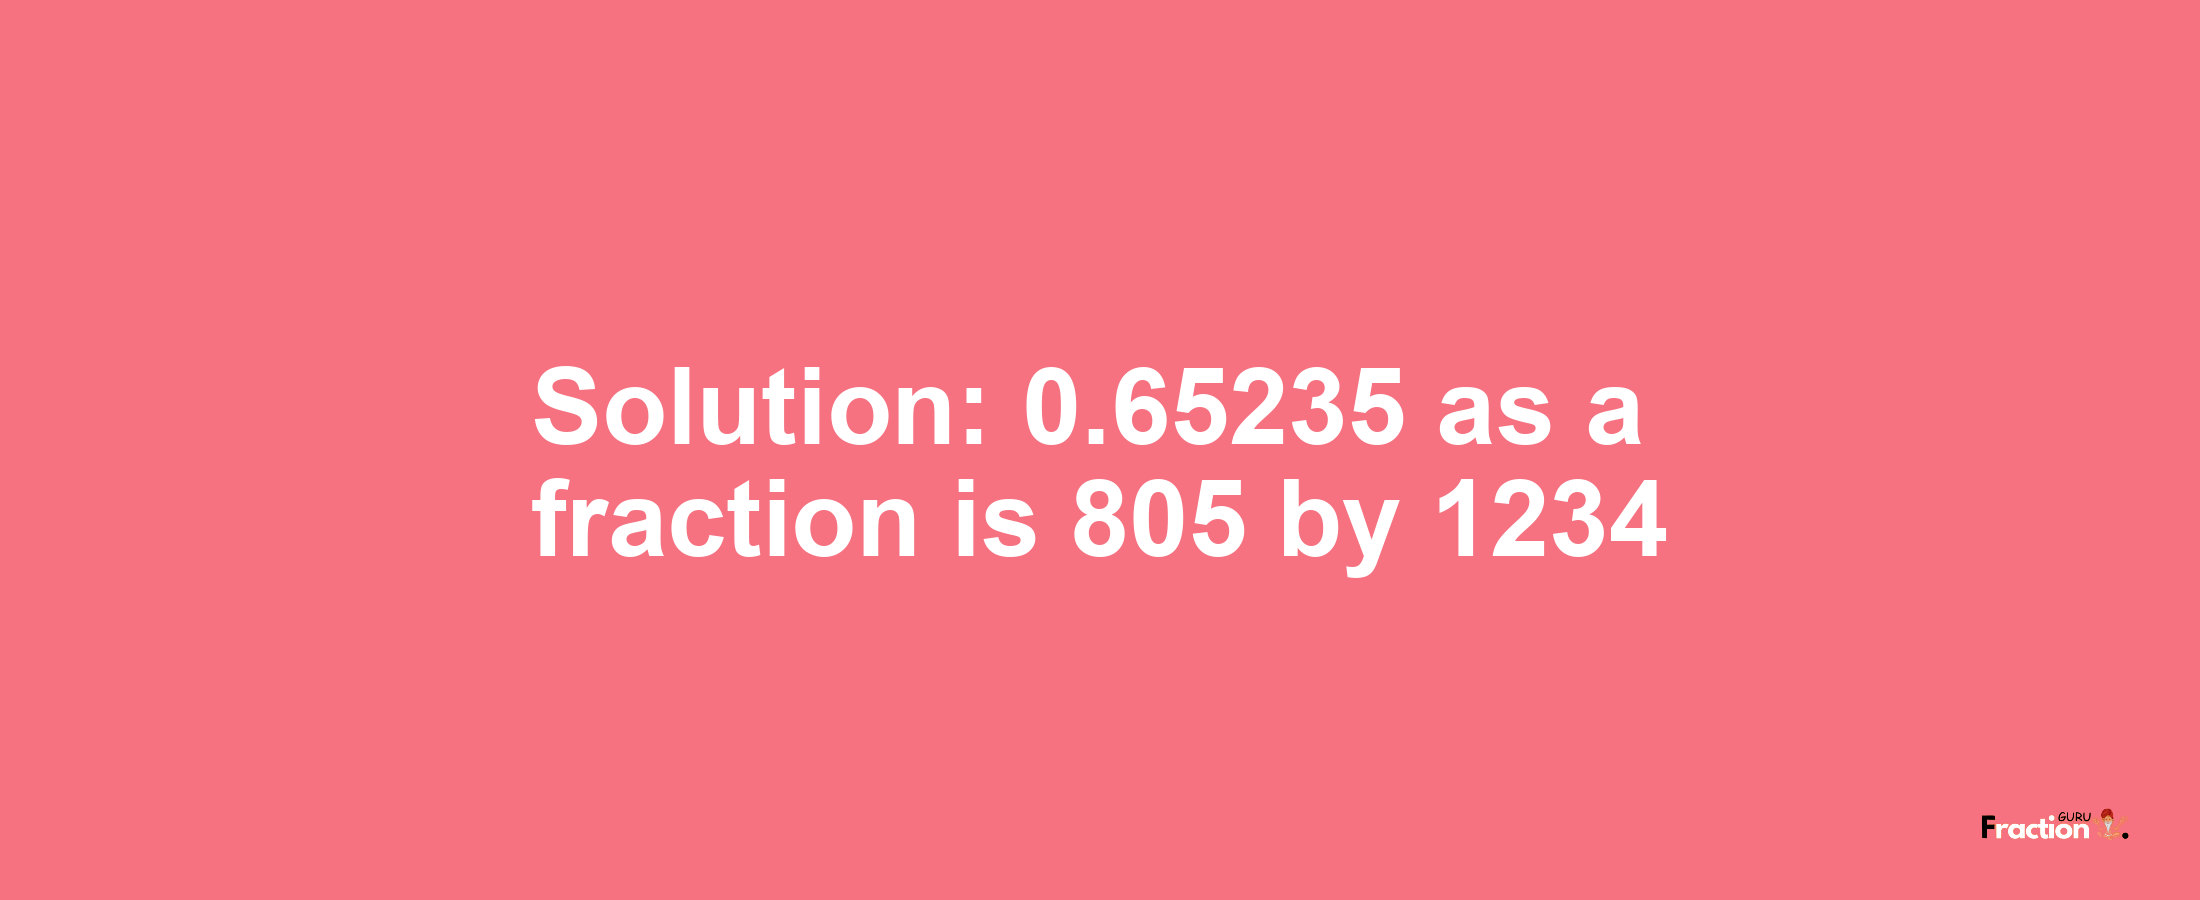 Solution:0.65235 as a fraction is 805/1234